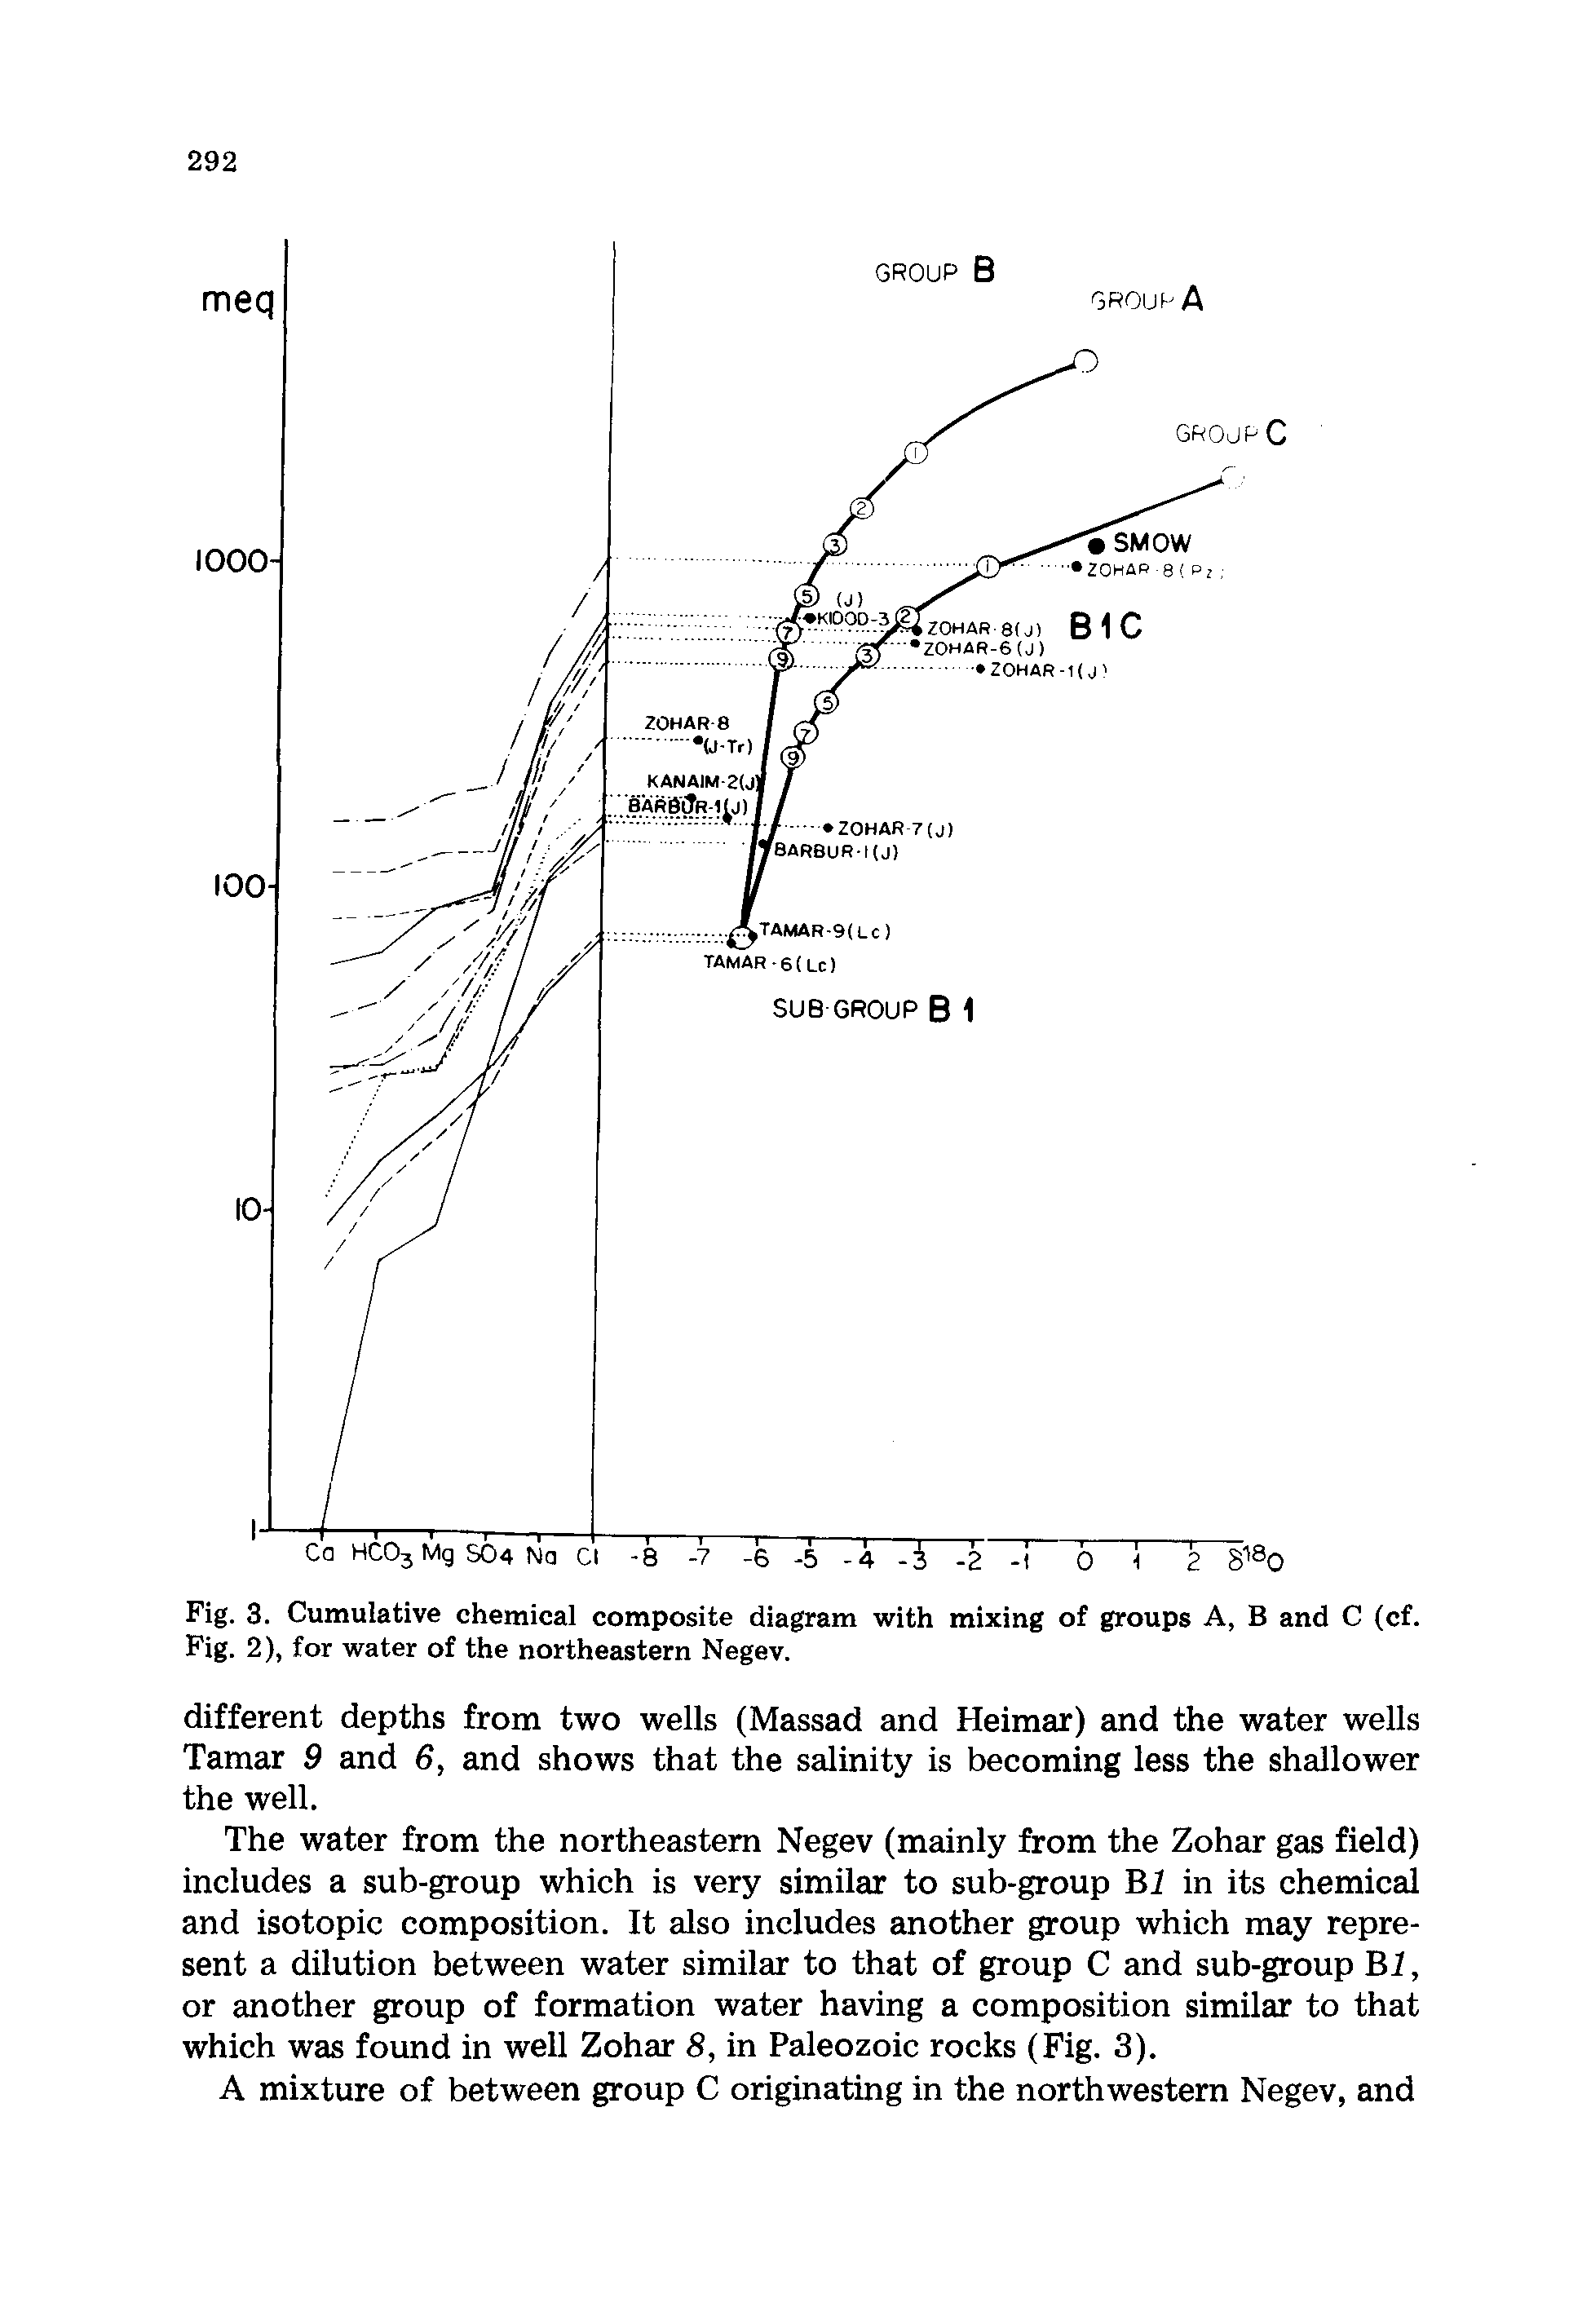 Fig. 3. Cumulative chemical composite diagram with mixing of groups A, B and C (cf. Fig. 2), for water of the northeastern Negev.